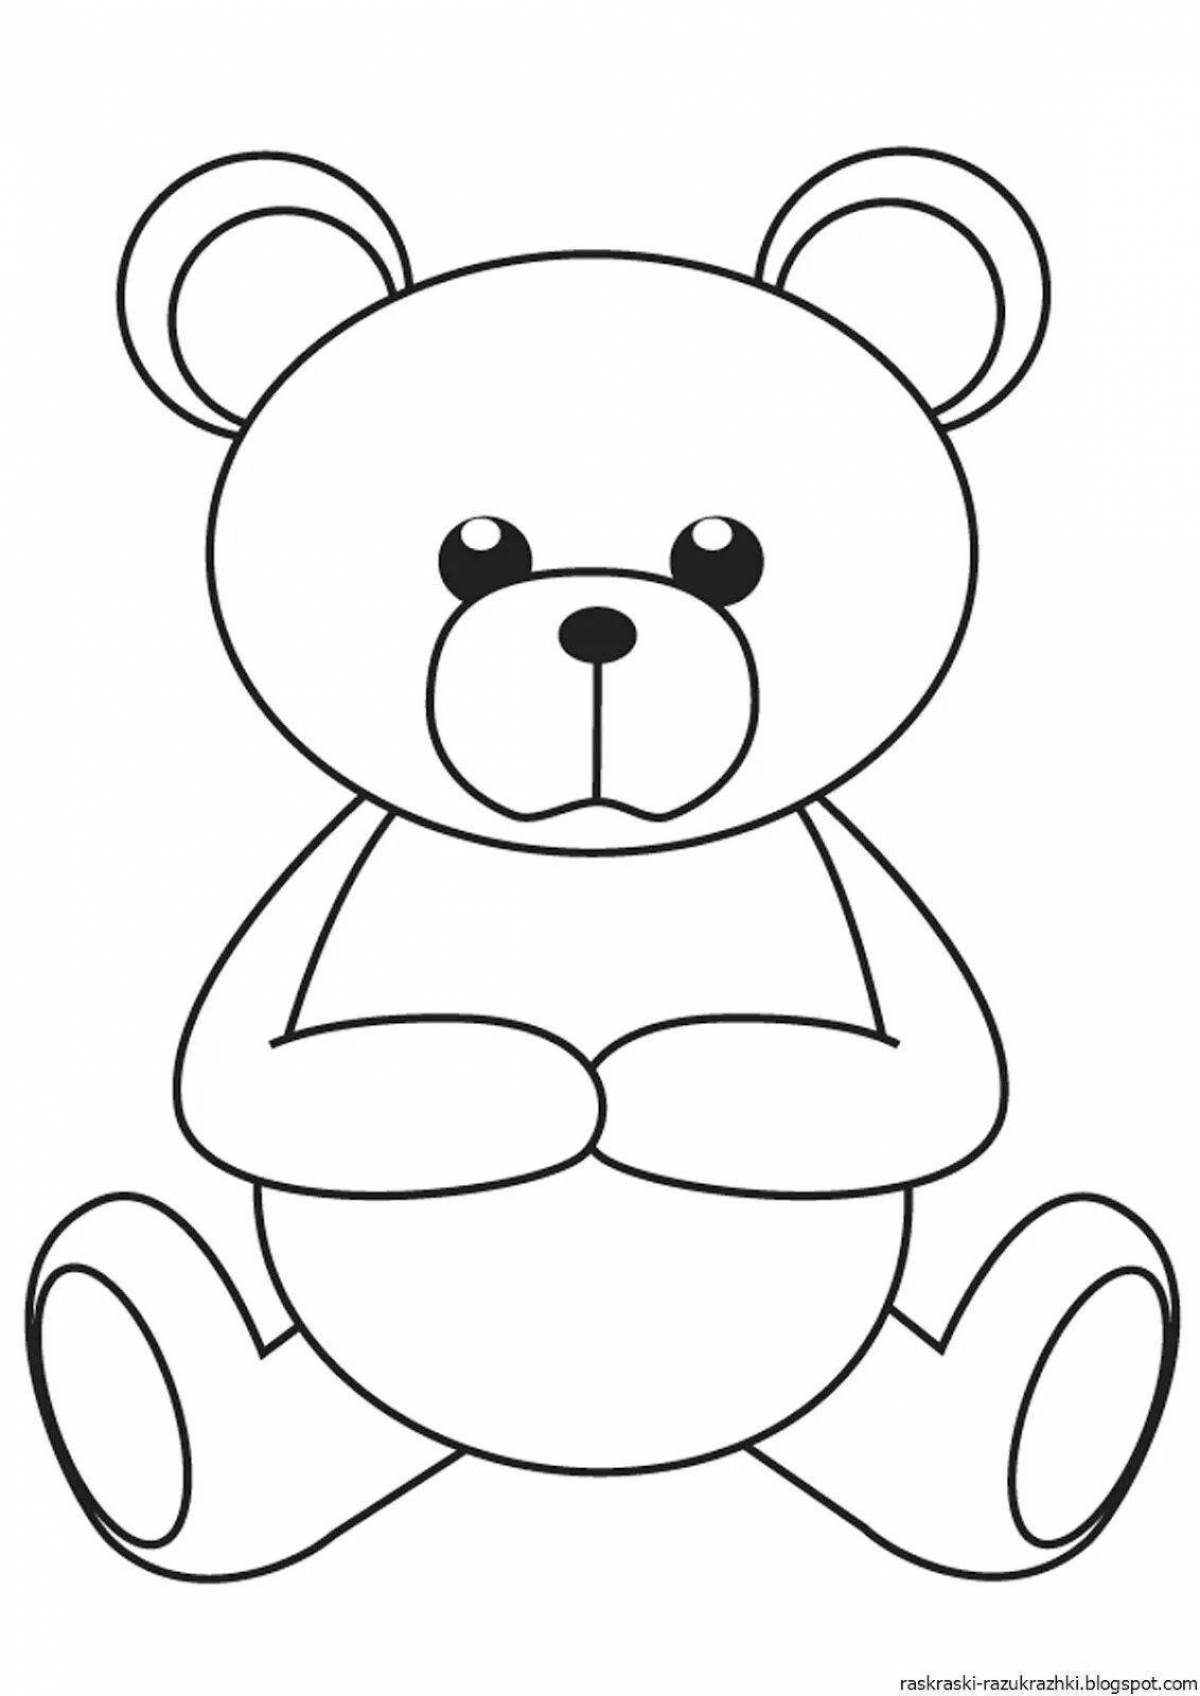 Fun coloring bear for children 3-4 years old